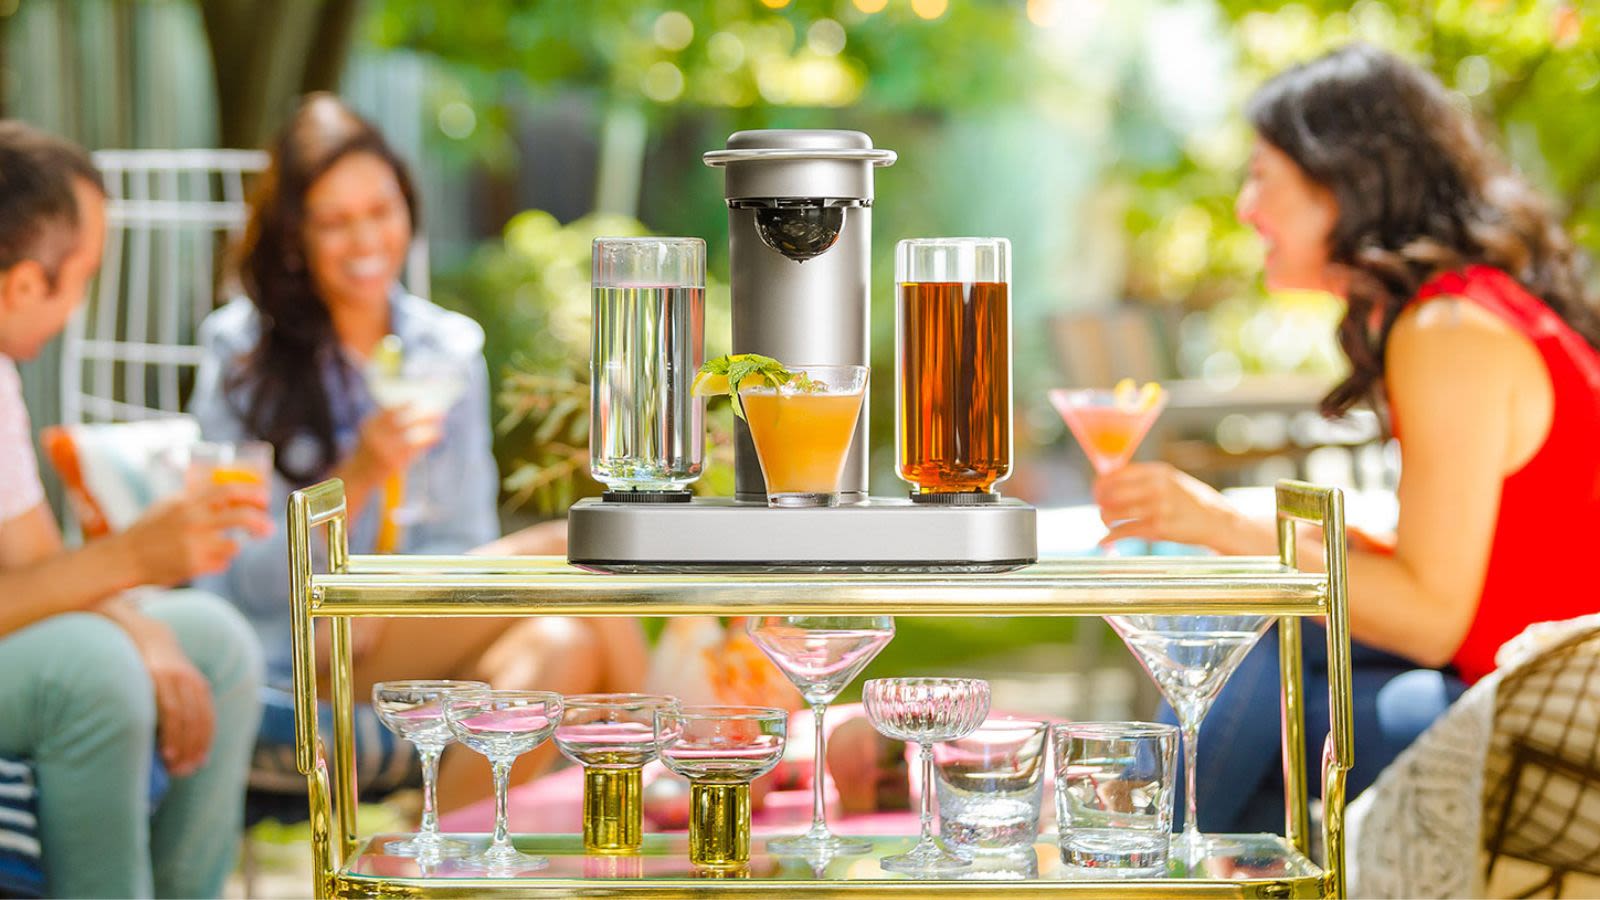 Bartesian home cocktail maker dispenses delicious drinks in